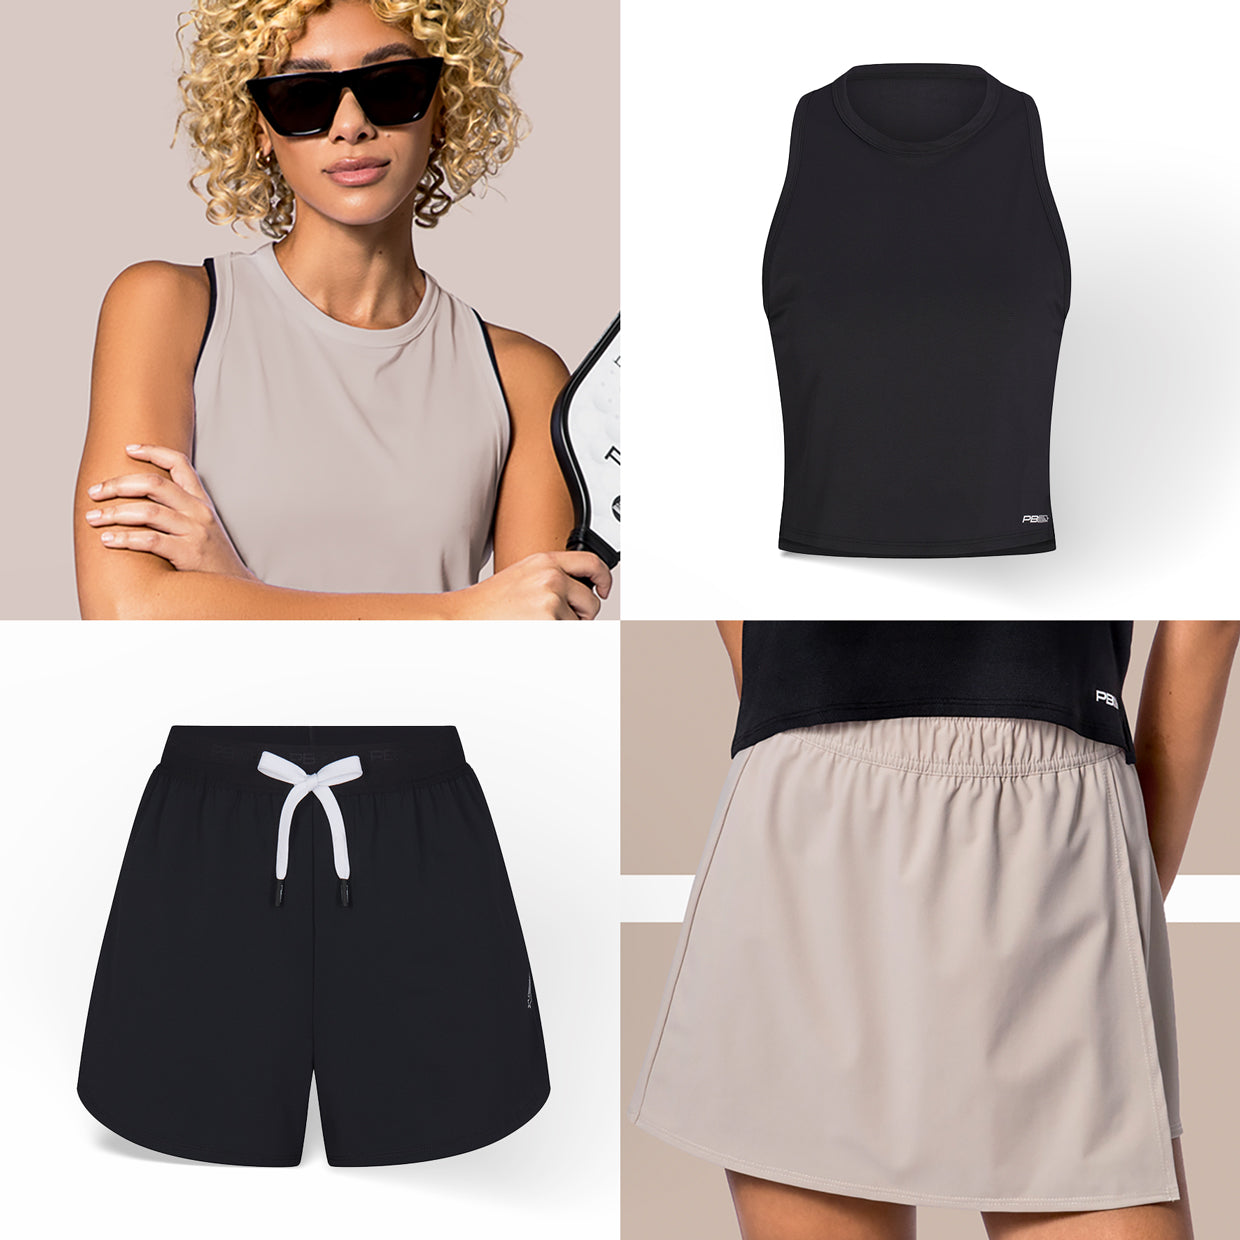 Four PB5star images showing Cropped Tank, Signature Shorts, ad lightweight wrap skirt in Soft Clay and Black Colors